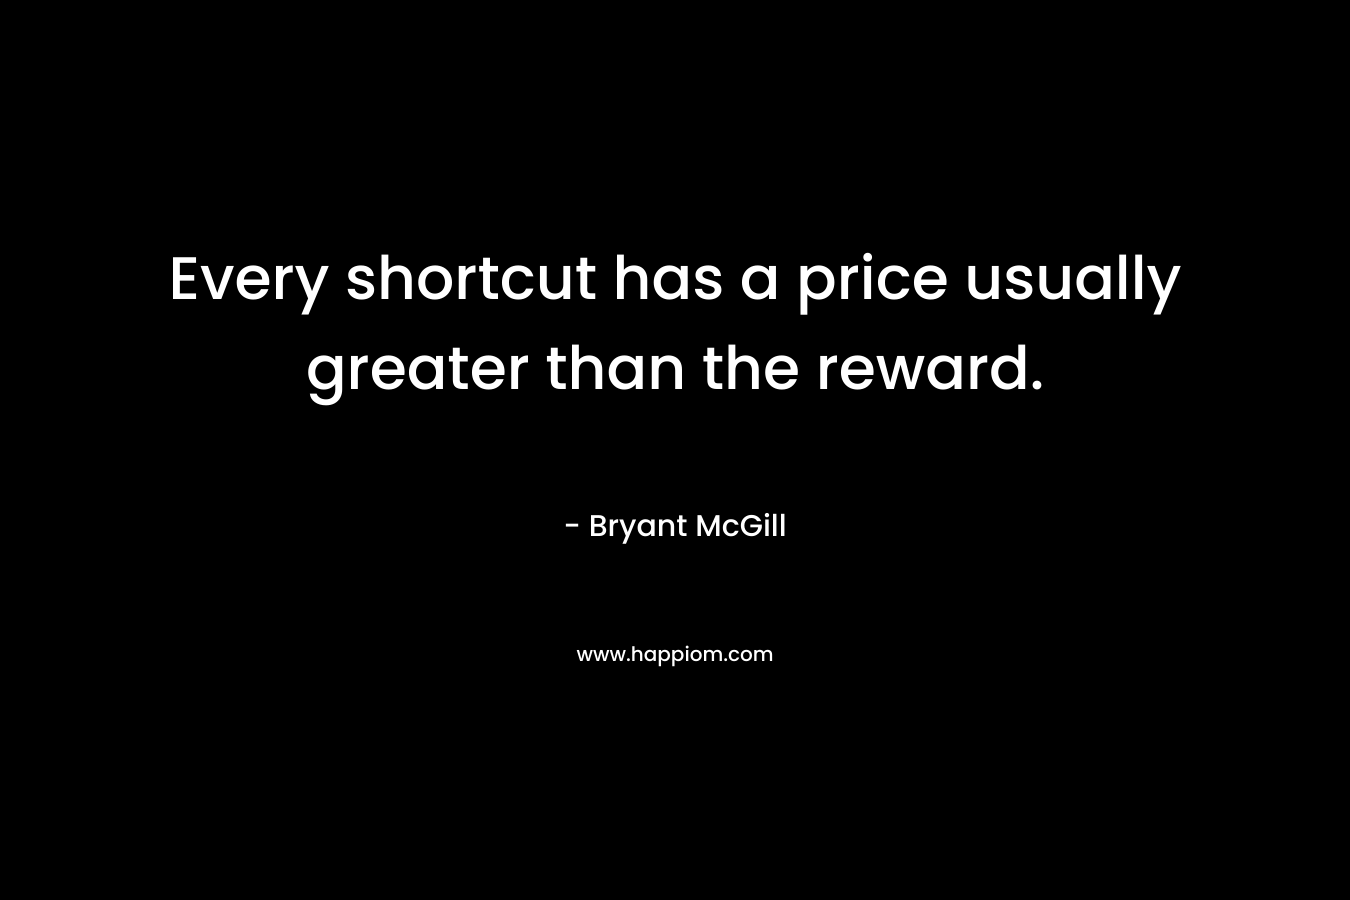 Every shortcut has a price usually greater than the reward. – Bryant McGill